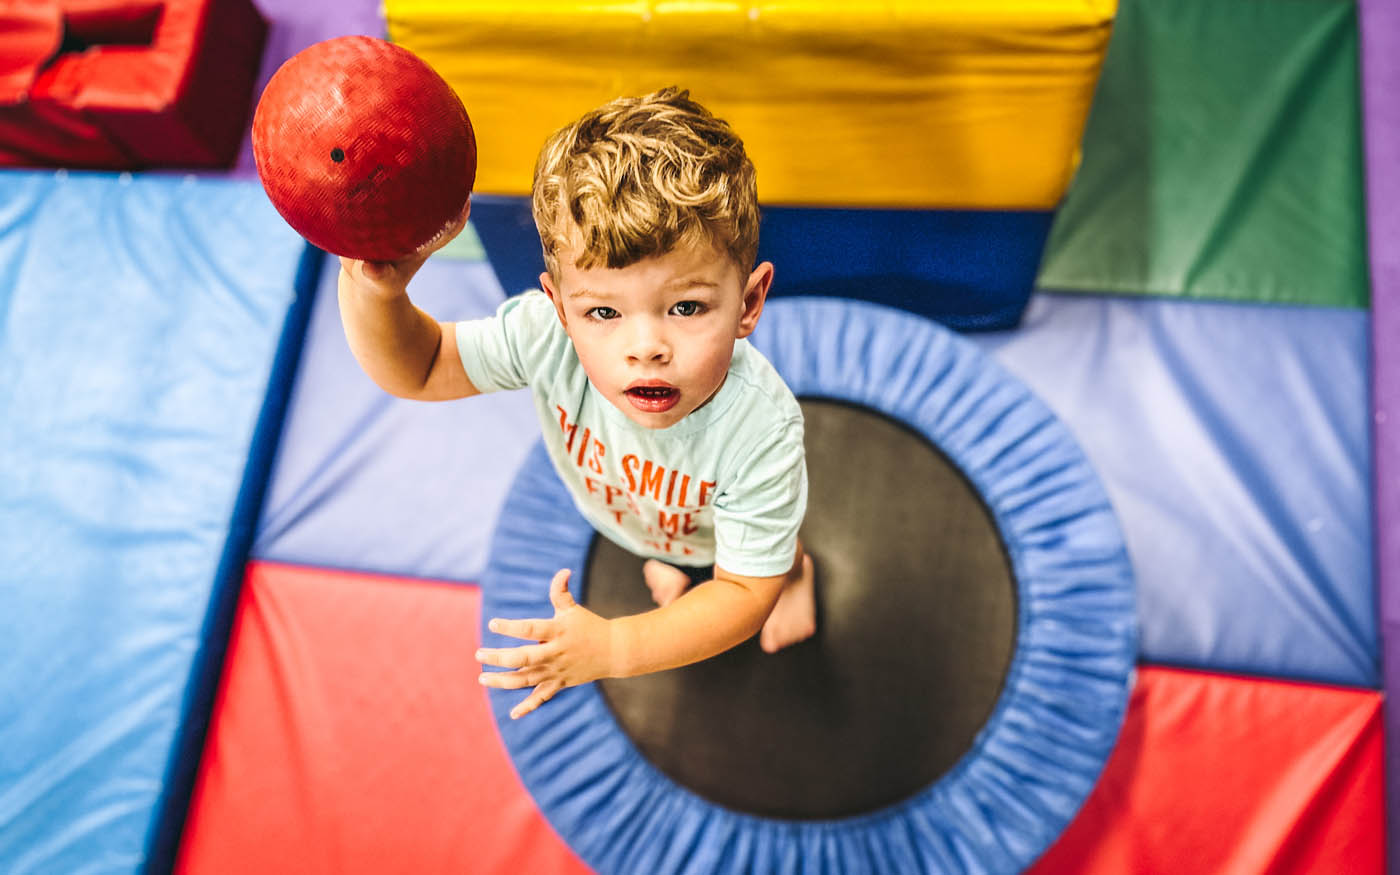 A toddler jumping on a Romp n' Roll tramp, learn more about our kids activities in Raleigh, NC.